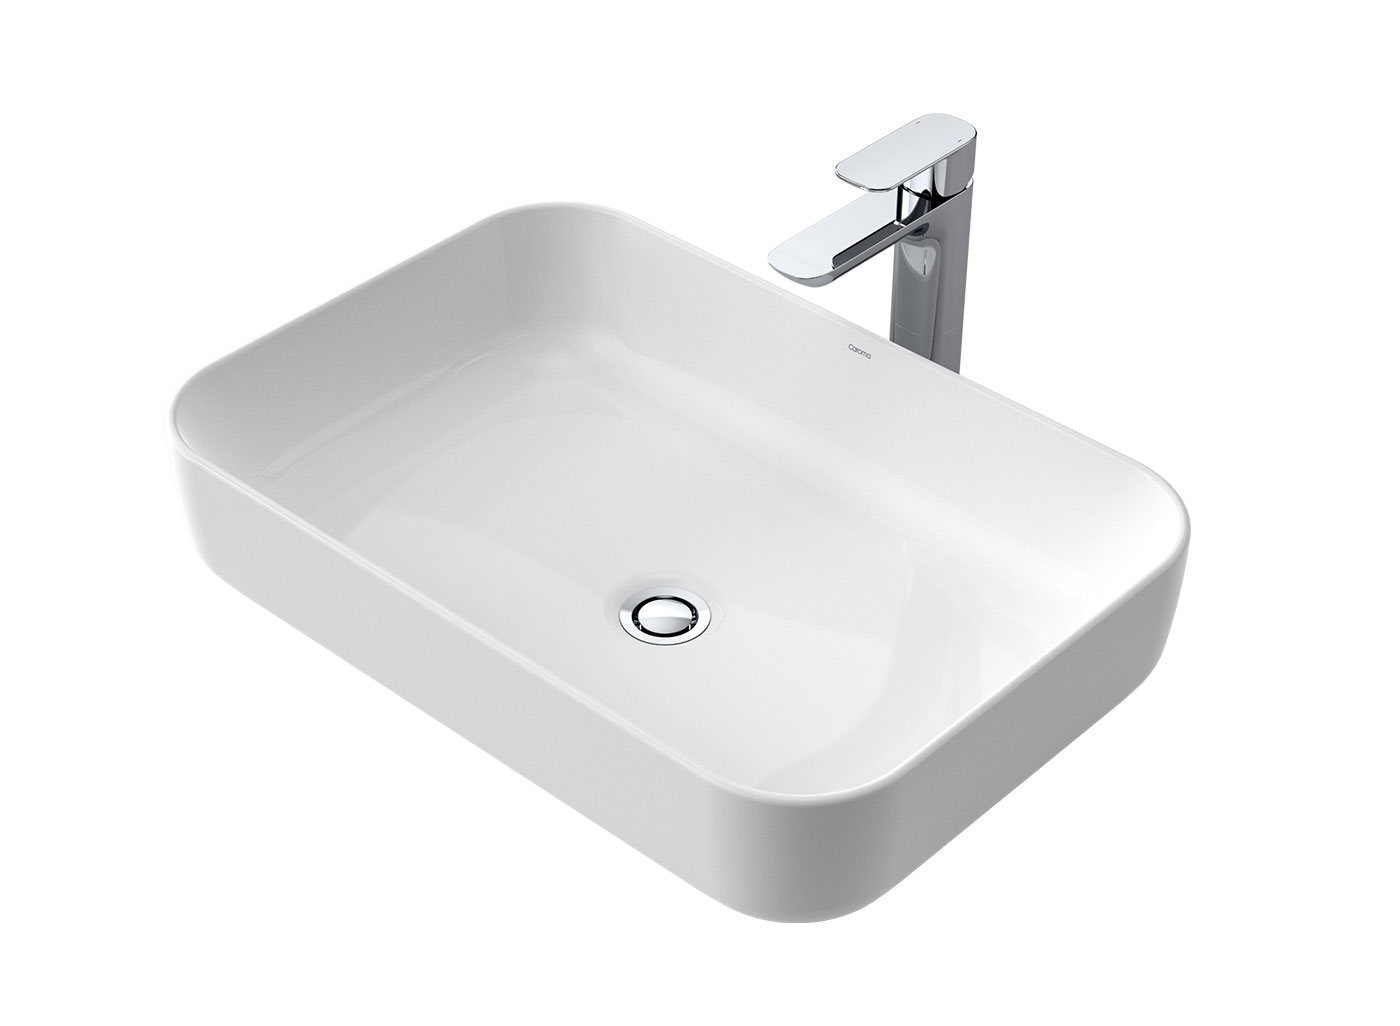 The Tribute collection features a stylish array of basins to suit a range of bathroom and lifestyle needs. Designed and built with Australian ingenuity to bring the best in modern design to your bathroom.